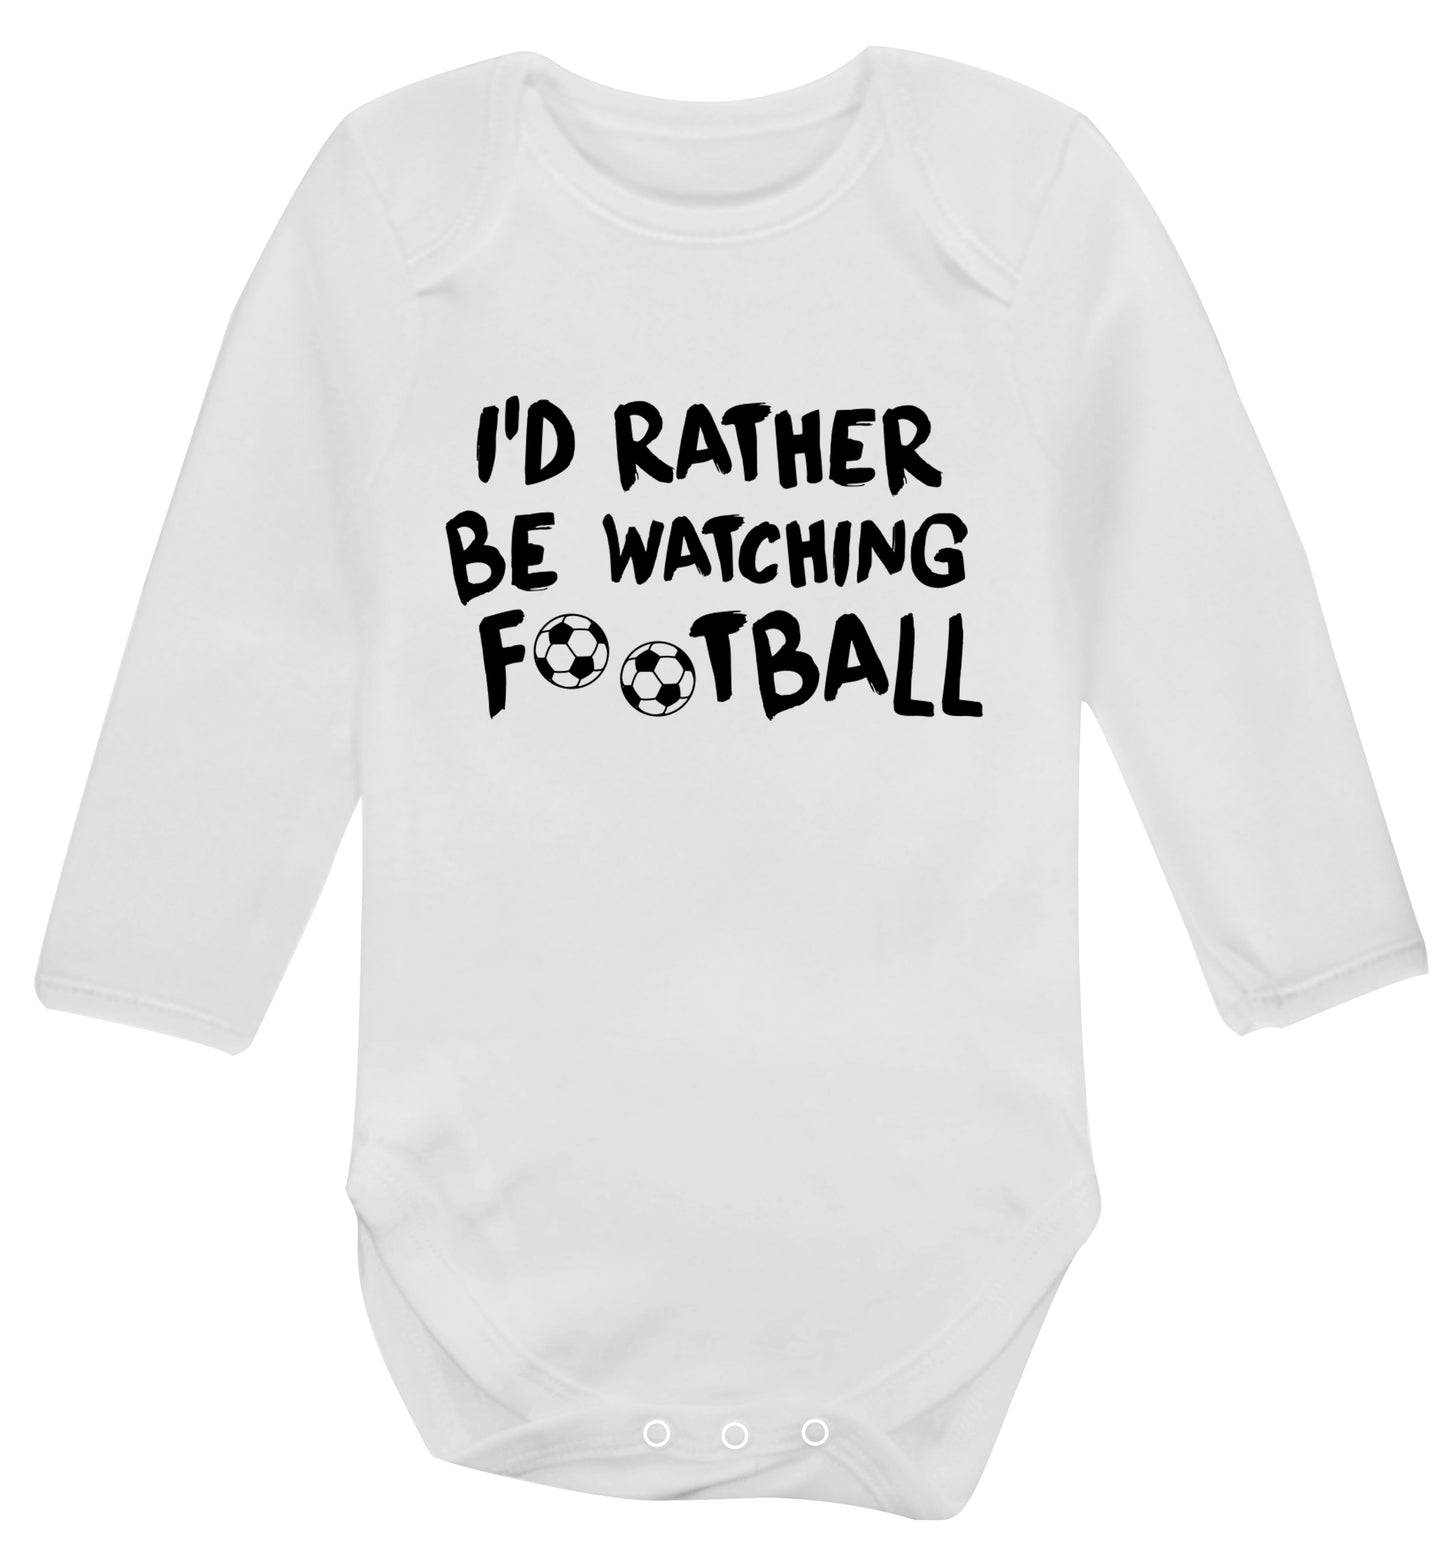 I'd rather be watching football Baby Vest long sleeved white 6-12 months